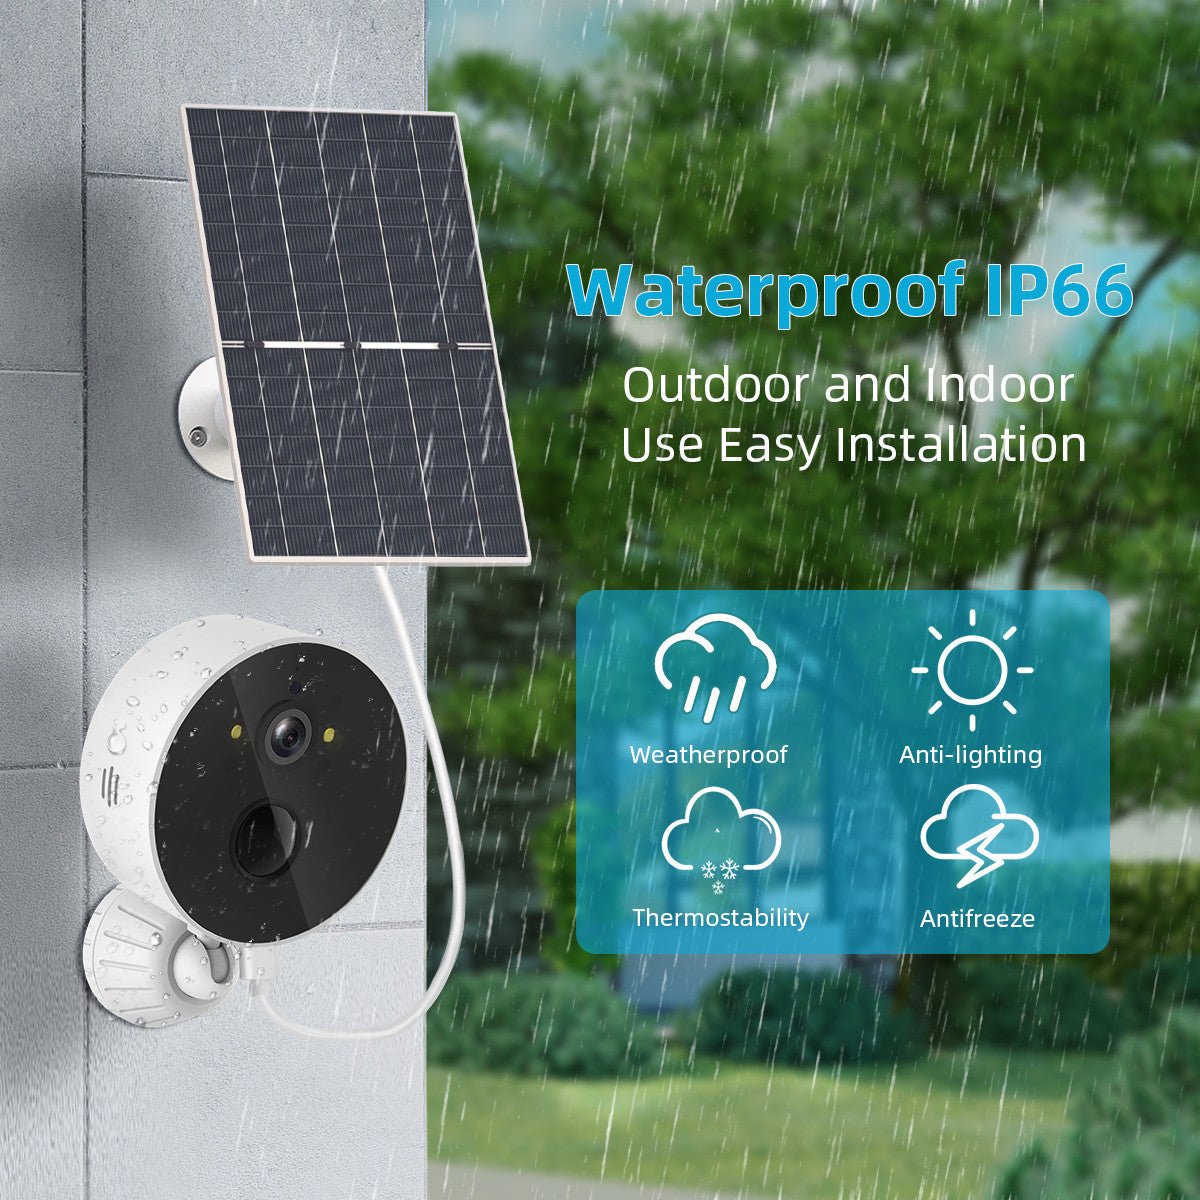 Solar Cell Monitoring Camera Outdoor Low Power Consumption - Little Commodities